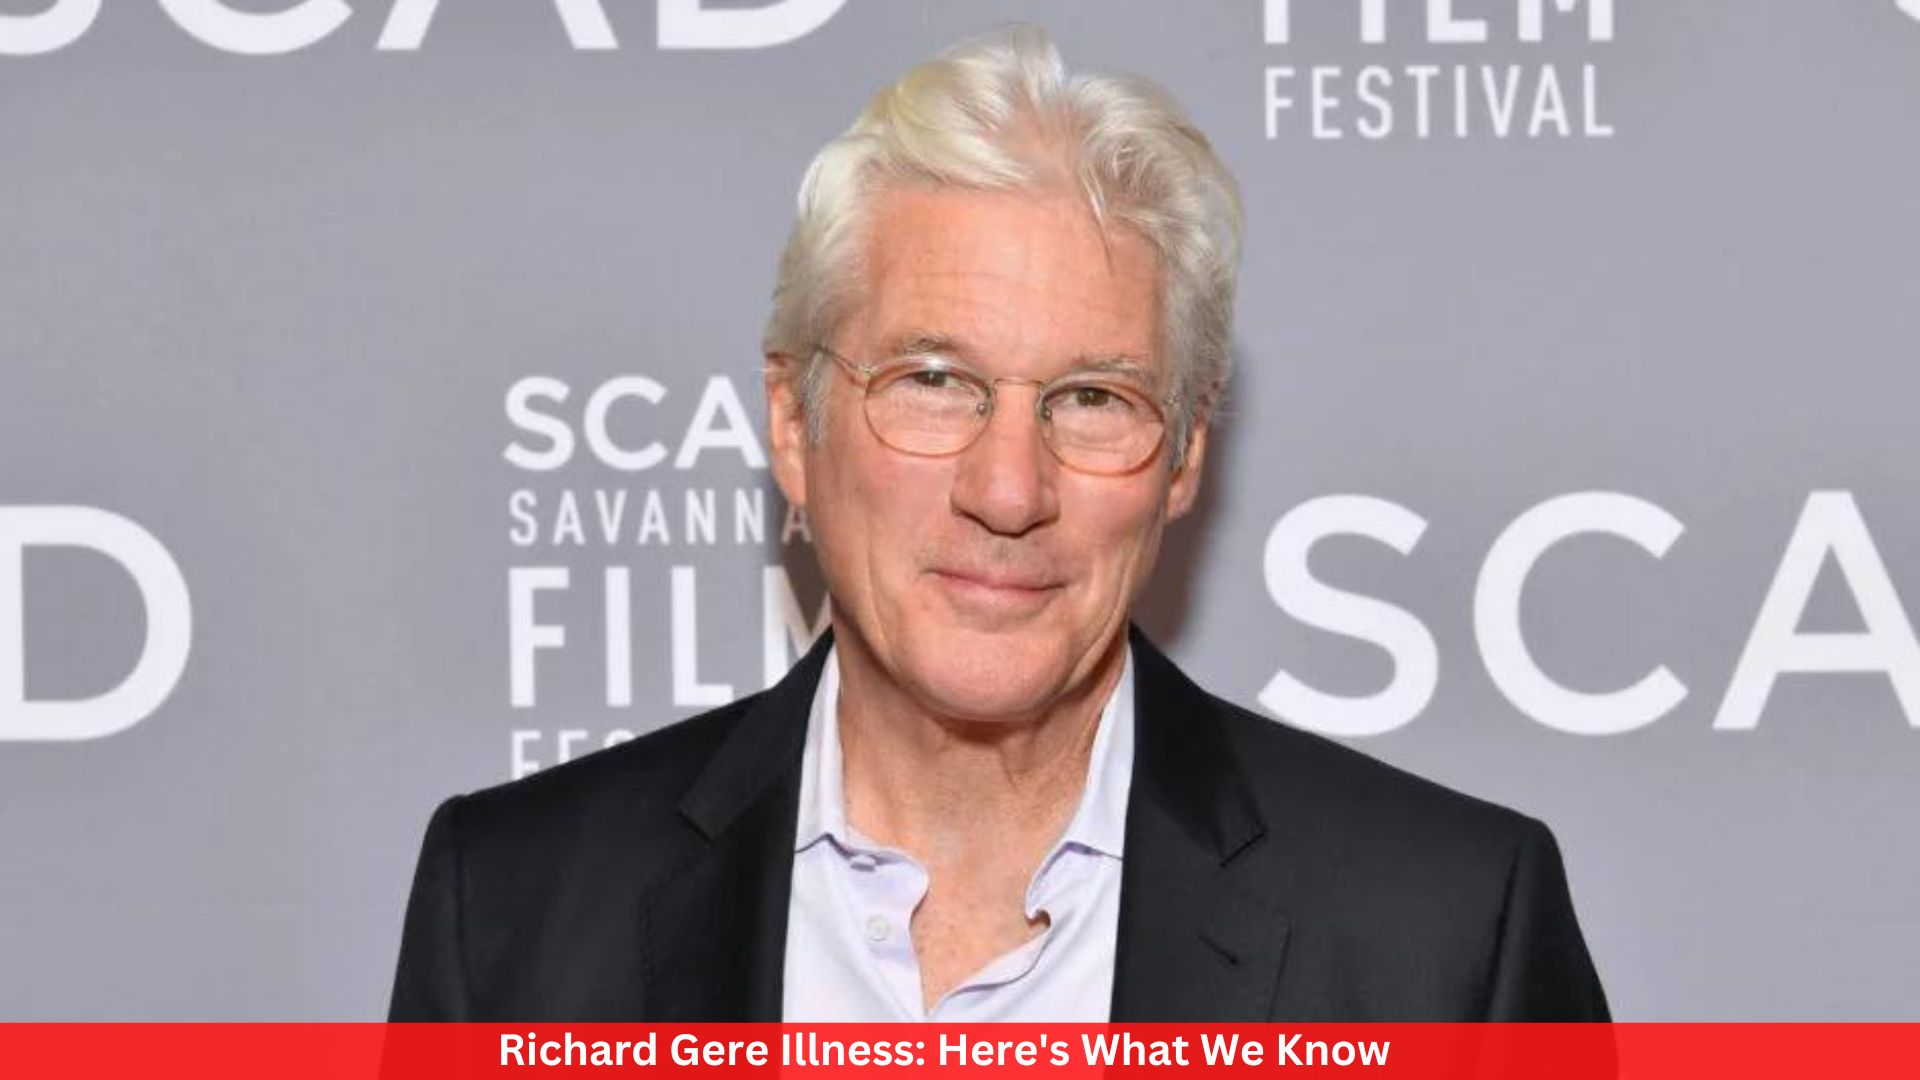 Richard Gere Illness: Here's What We Know